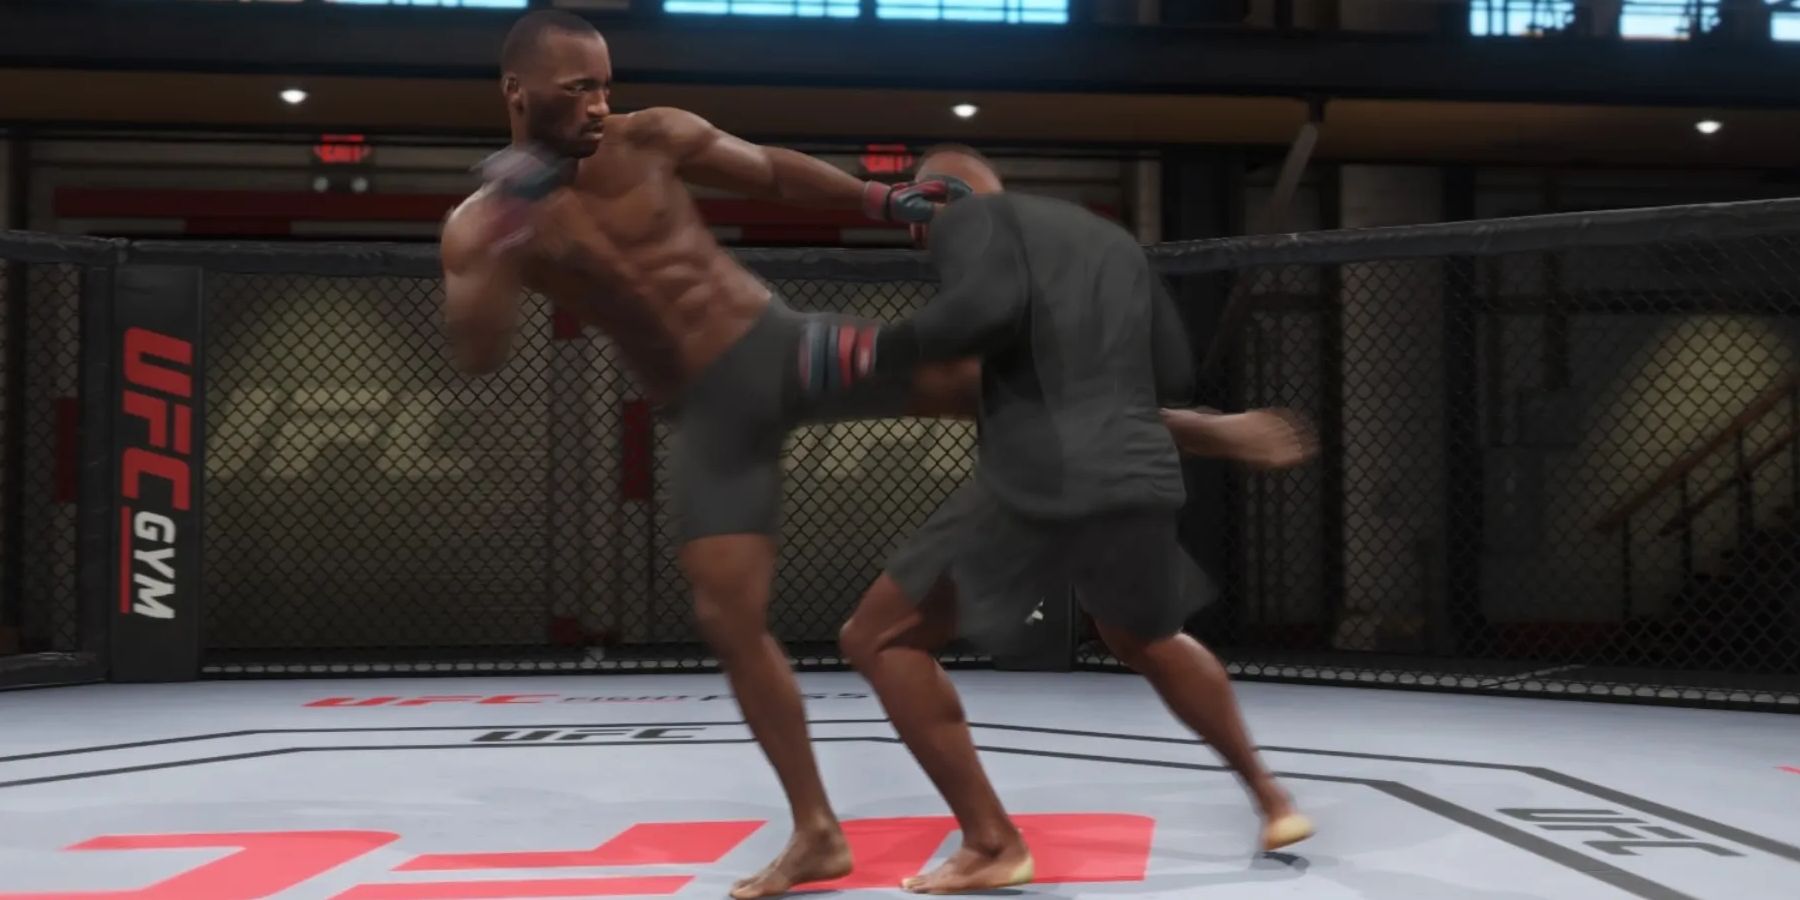 UFC Usman Leon throwing a body kick in the gym